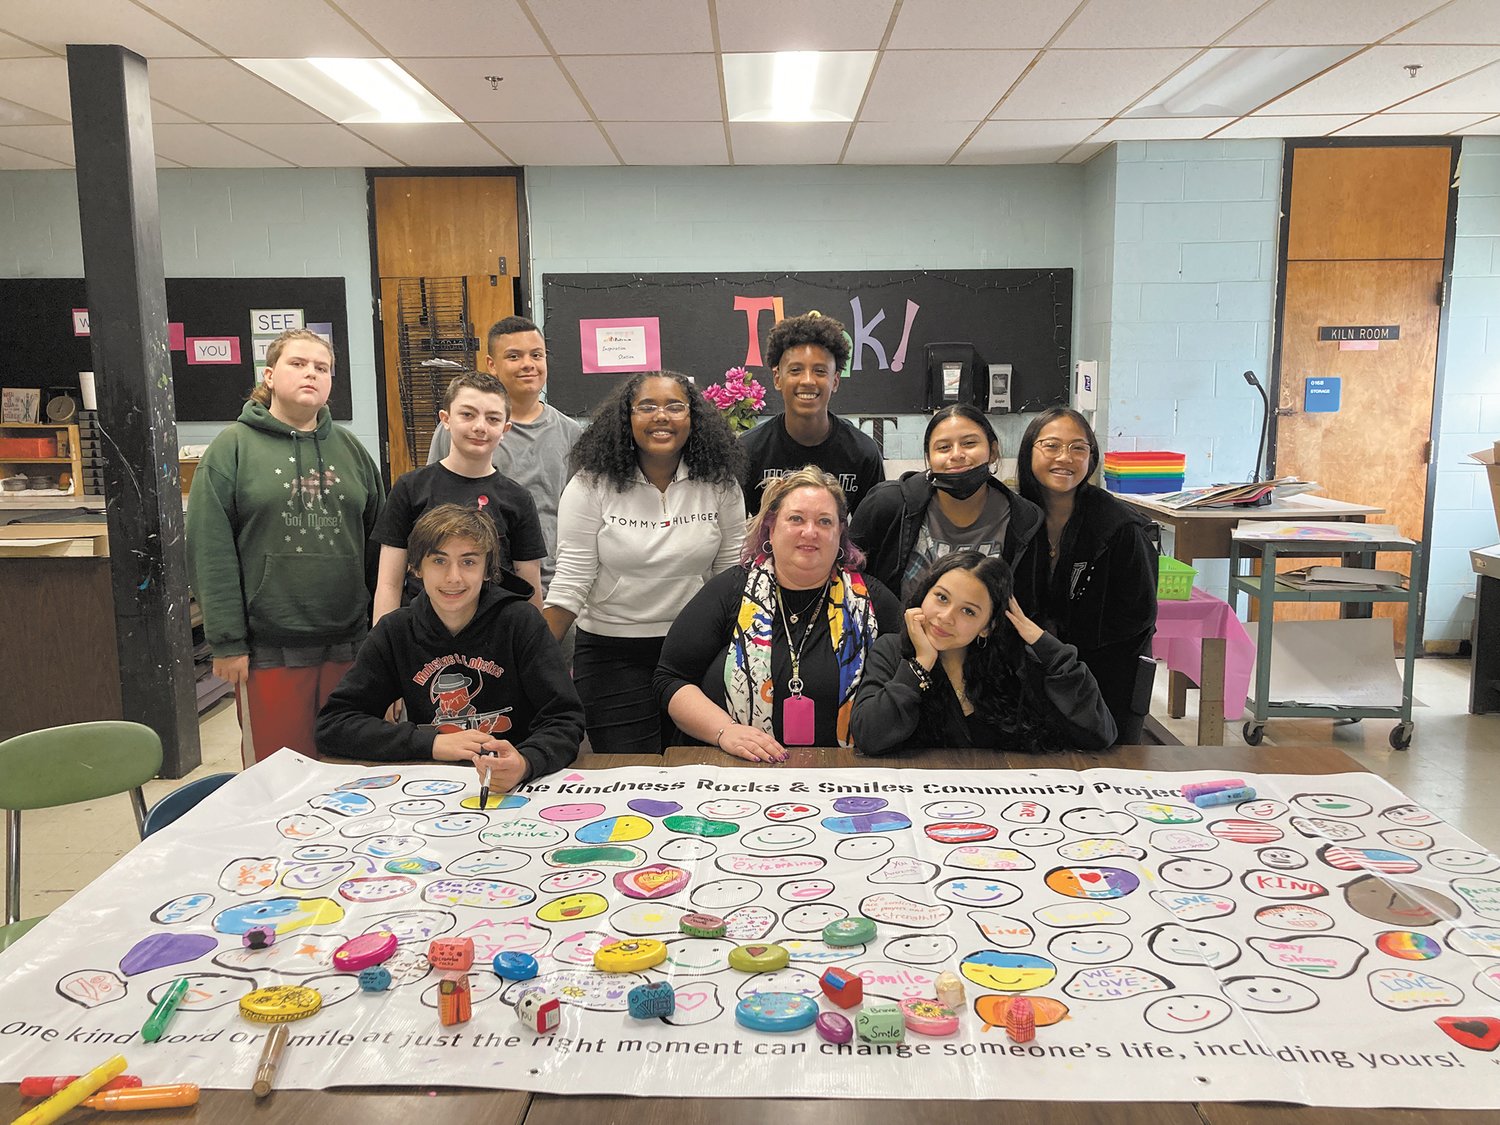 SENDING SUPPORT THROUGH ART: Seventh and eighth grade students in Mary Greim-Gallo’s Western Hills Middle School art class created drawings, kindness rocks and completed a banner to send to a refugee center in Przemysl, Poland, to show their support for Ukrainains. (Herald photo)